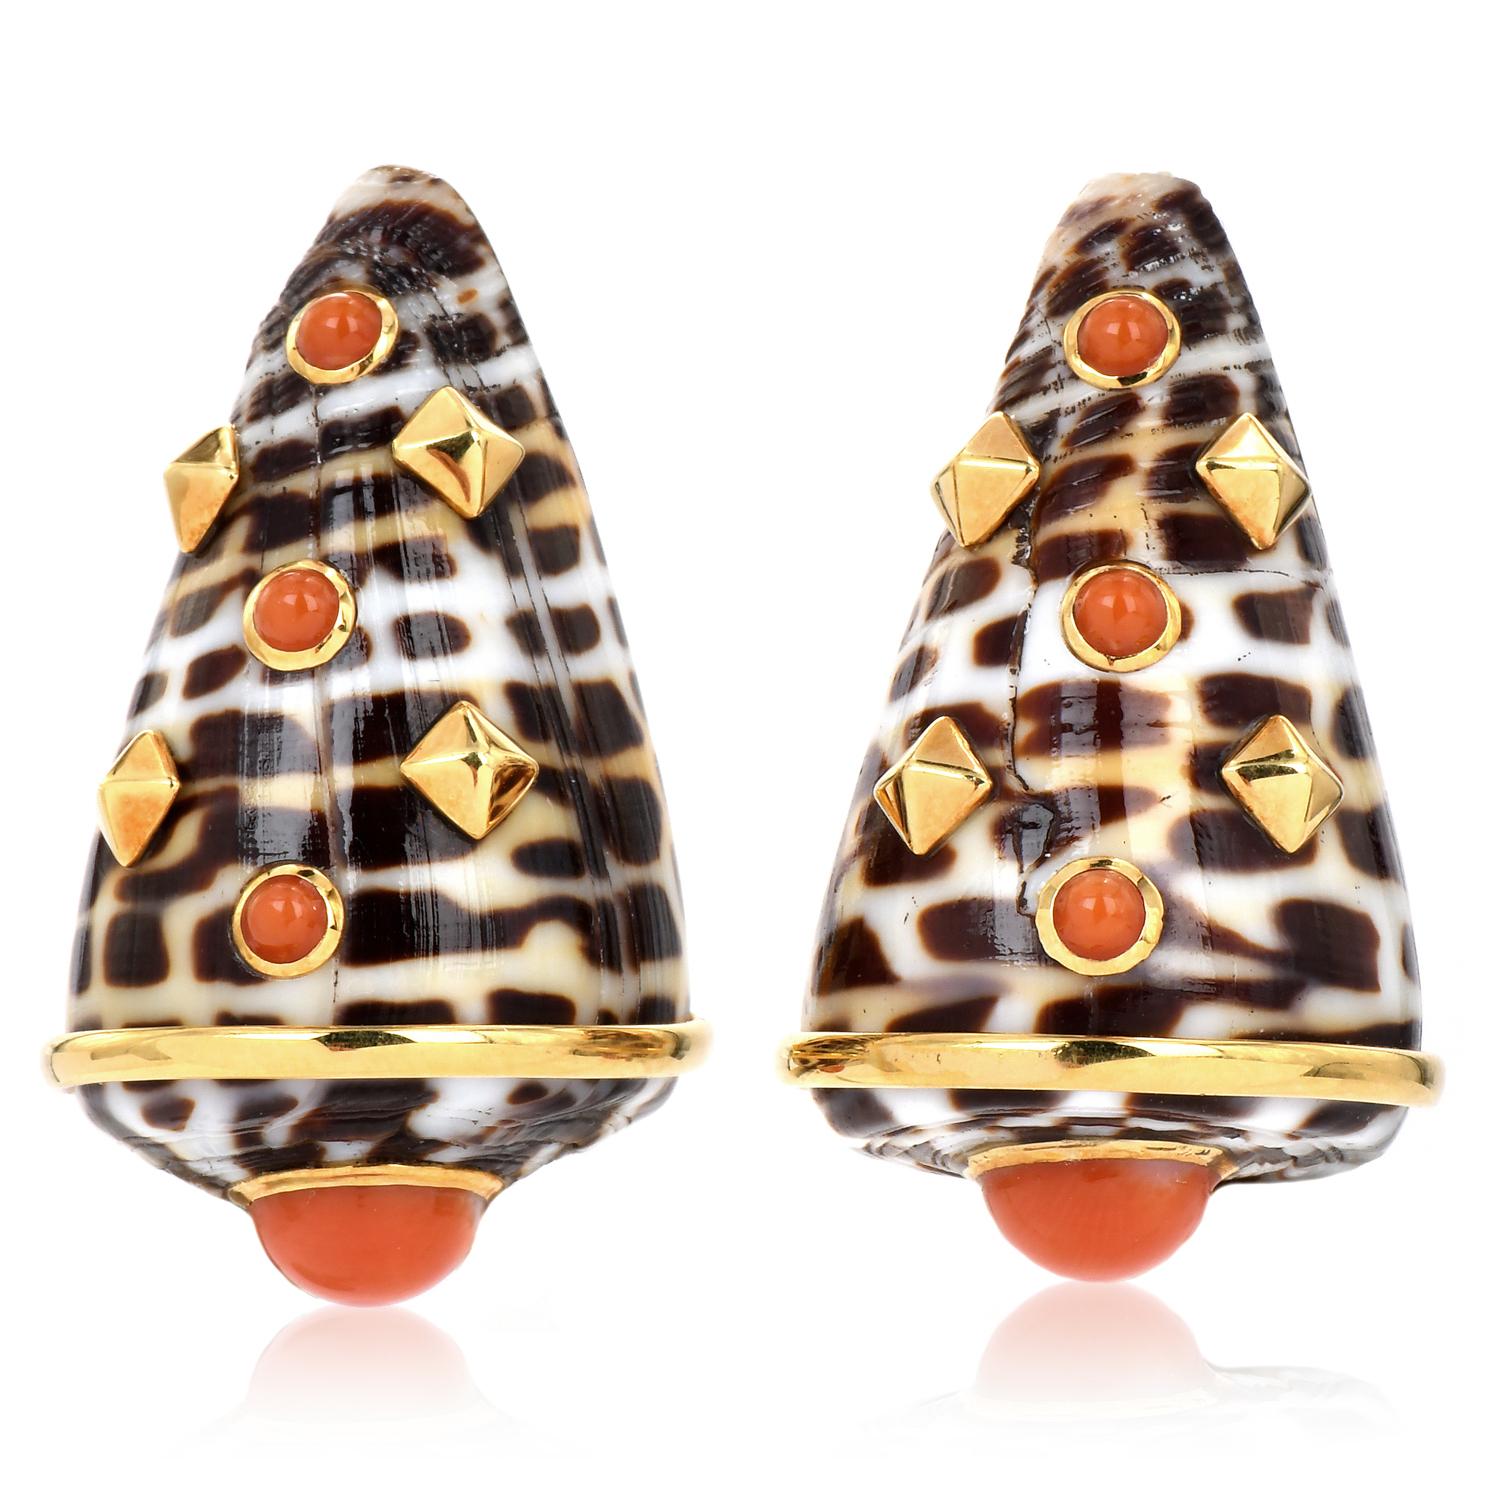 Celebrated this Pair of Exotic Shells mounted in 18kt Yellow Gold & Bezel set with a round Coral Bead and Primed shape gold. These Clip On Vintage earrings are in excellent condition,

Signed Trianon Parent Company of Seaman Schepp.
Weight: 20.6